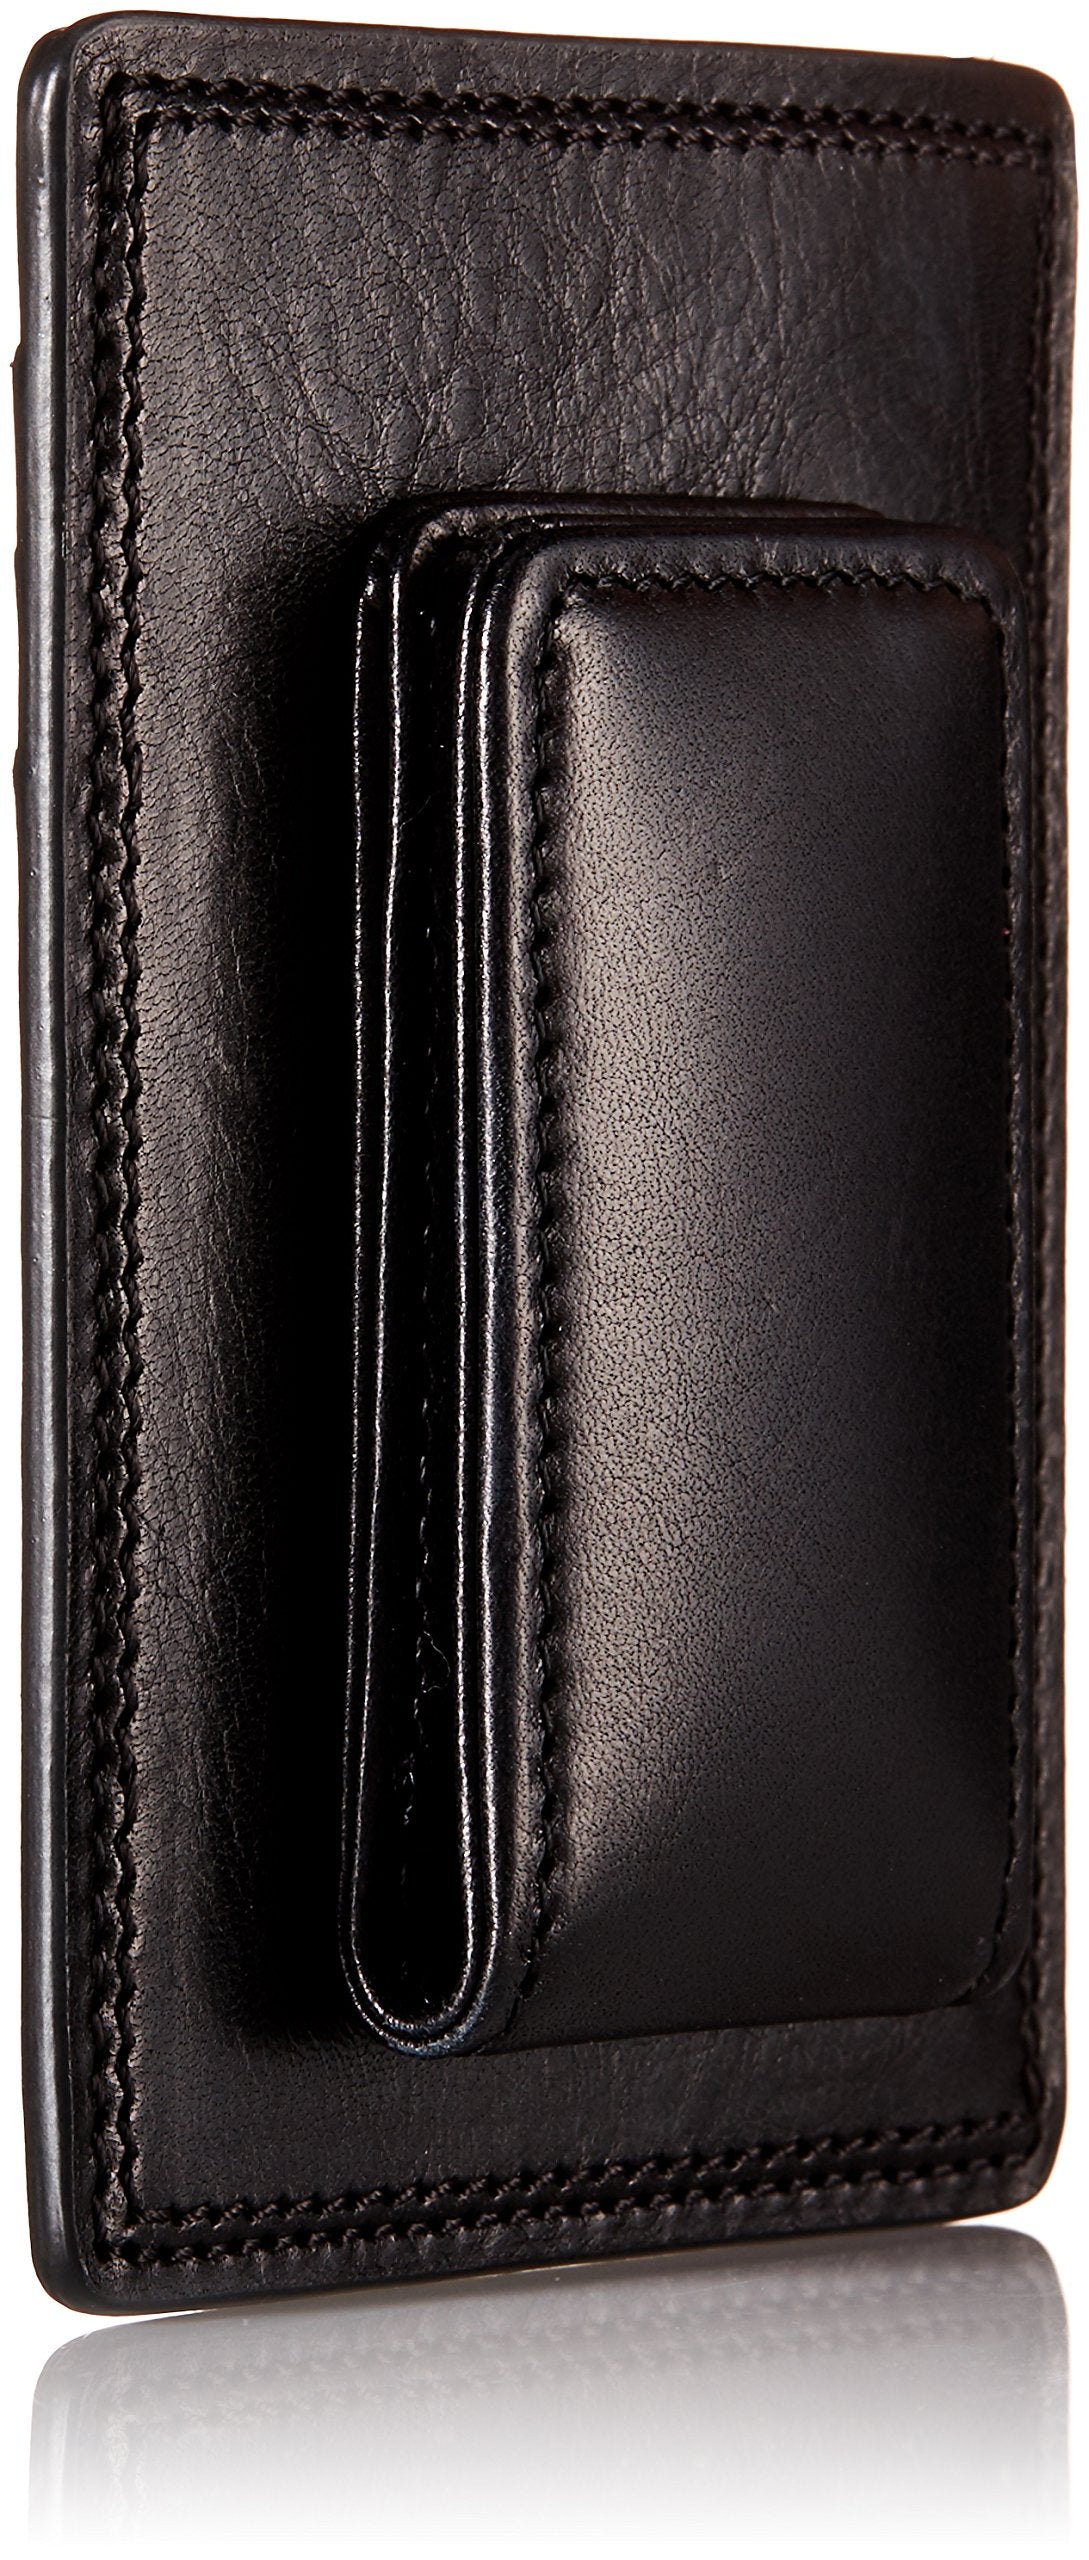 Bosca Men's Dolce Collection - Deluxe Front Pocket Wallet